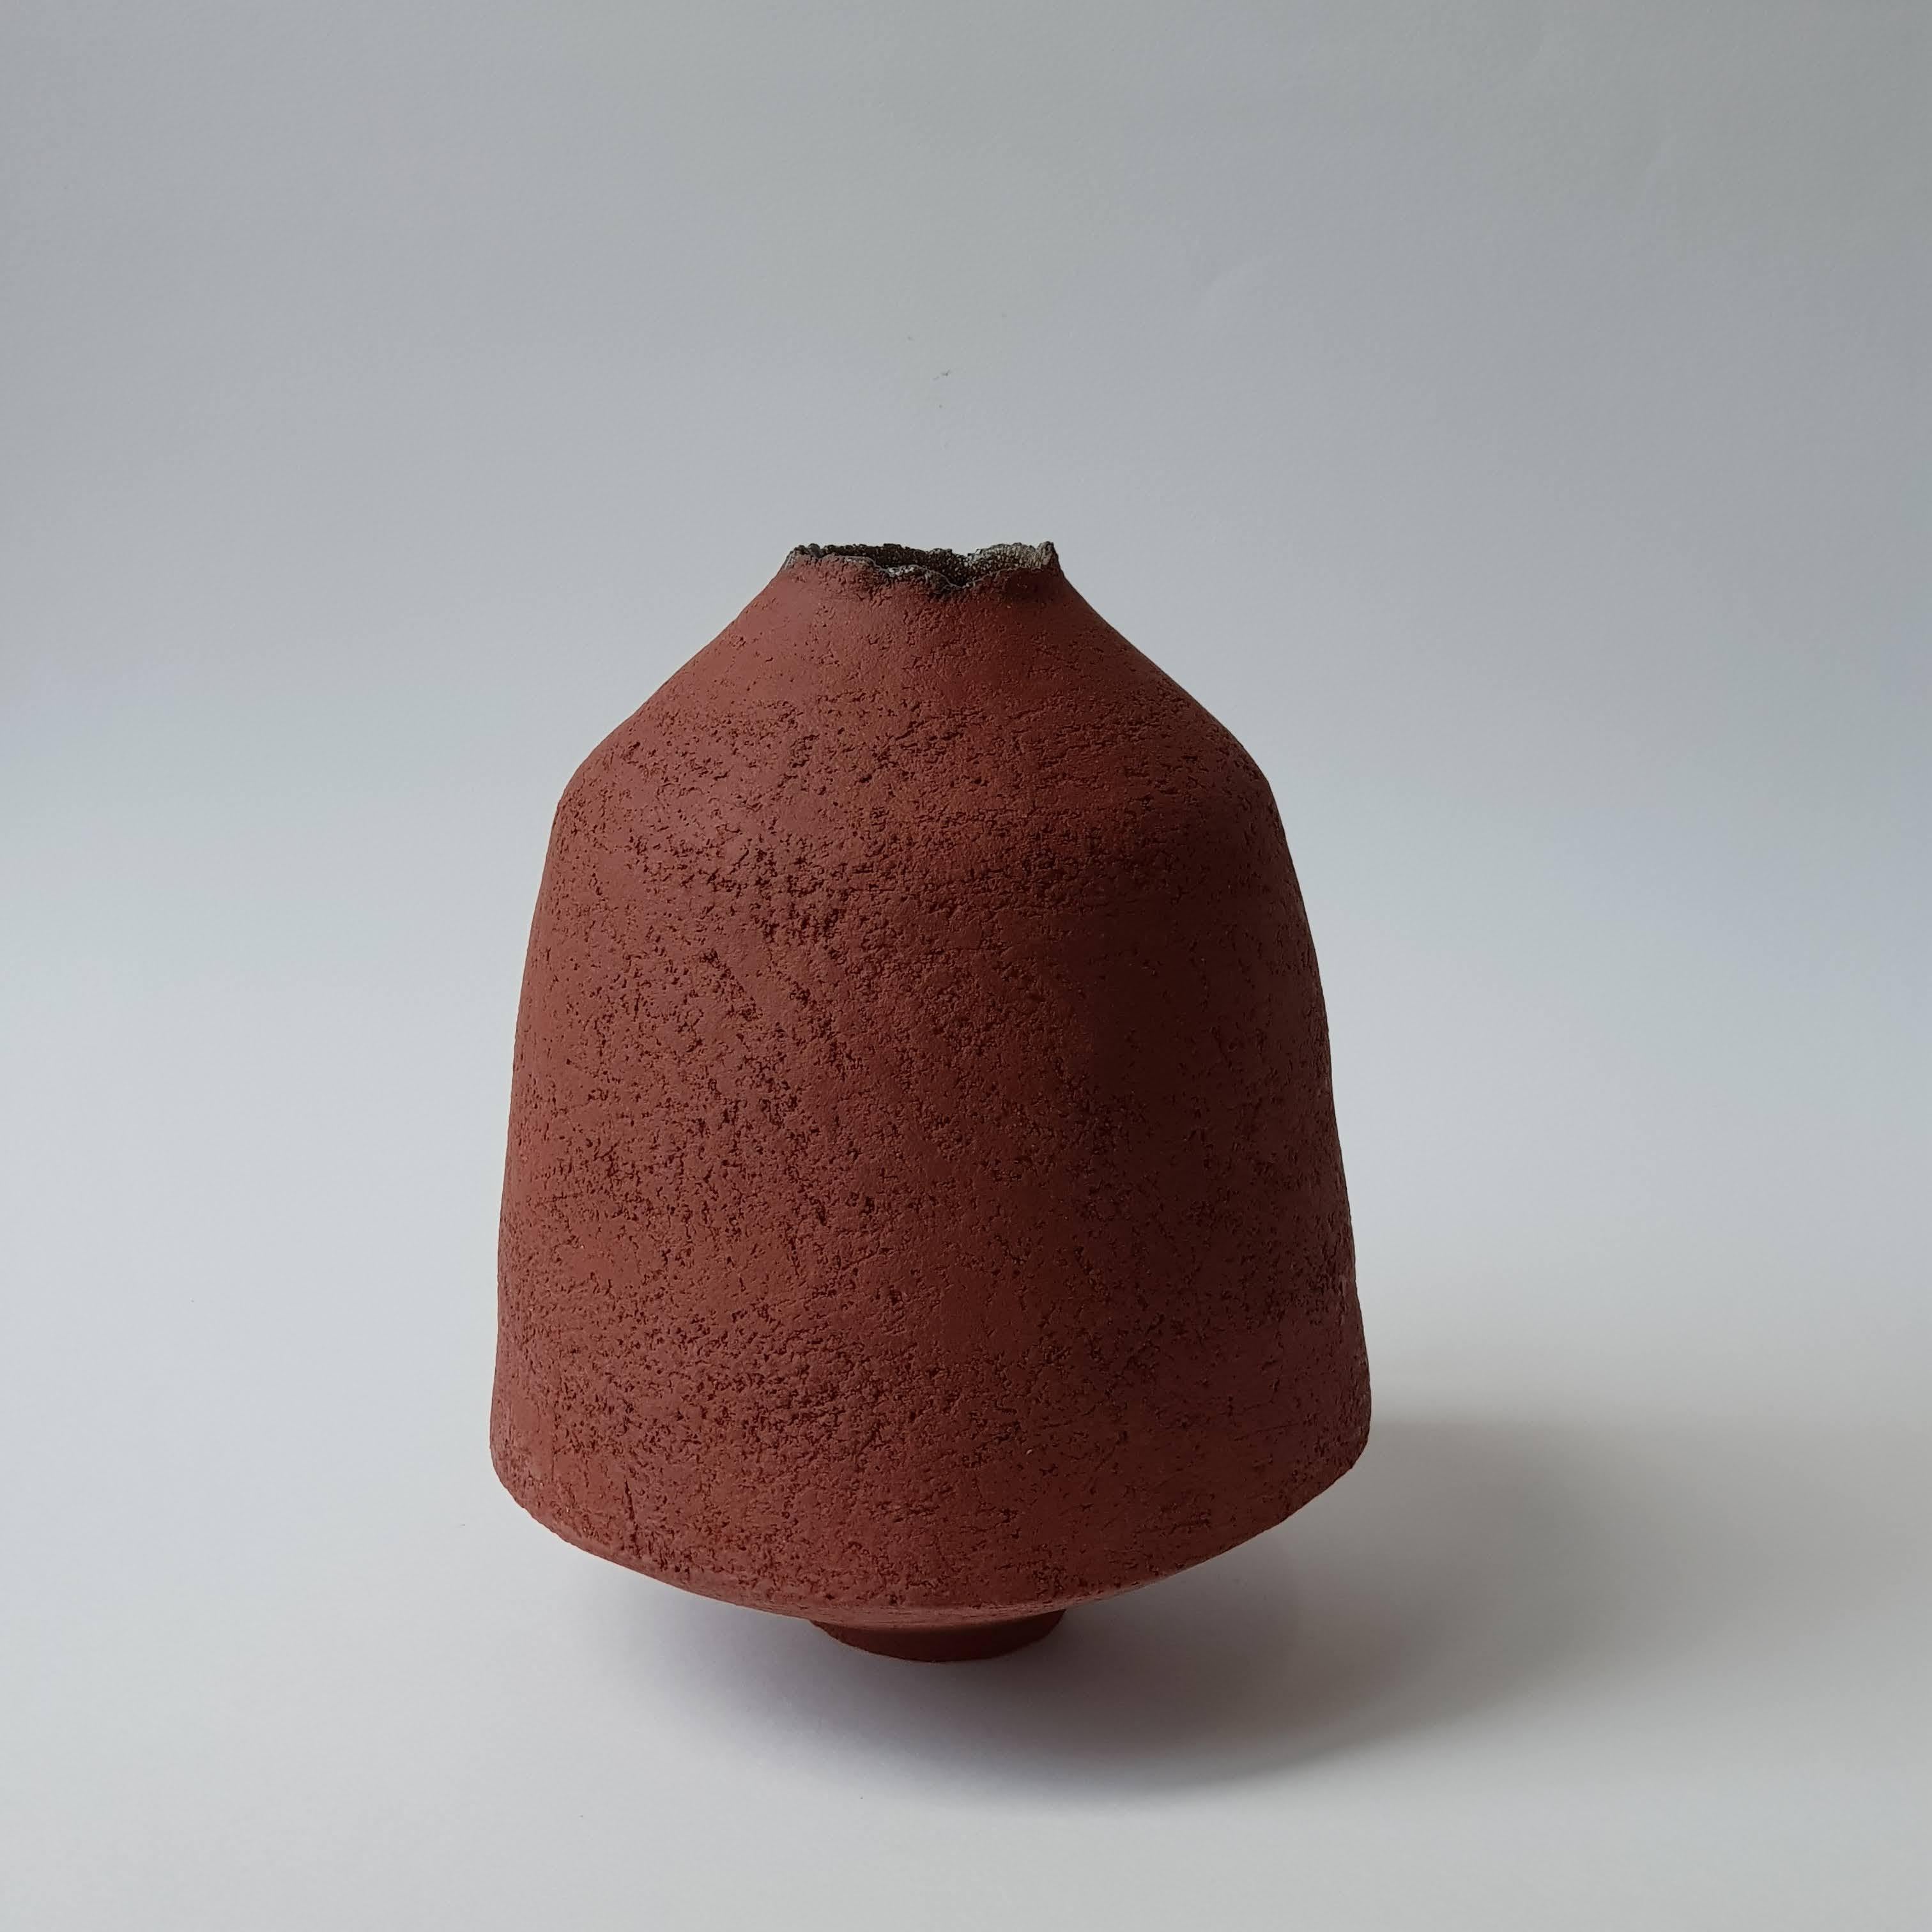 Red Stoneware Pithos Vase by Elena Vasilantonaki
Unique
Dimensions: ⌀ 19 x H 24 cm (Dimensions may vary)
Materials: Stoneware
Available finishes: Black, White, Brown, Red, White Patina

Growing up in Greece I was surrounded by pottery forms that